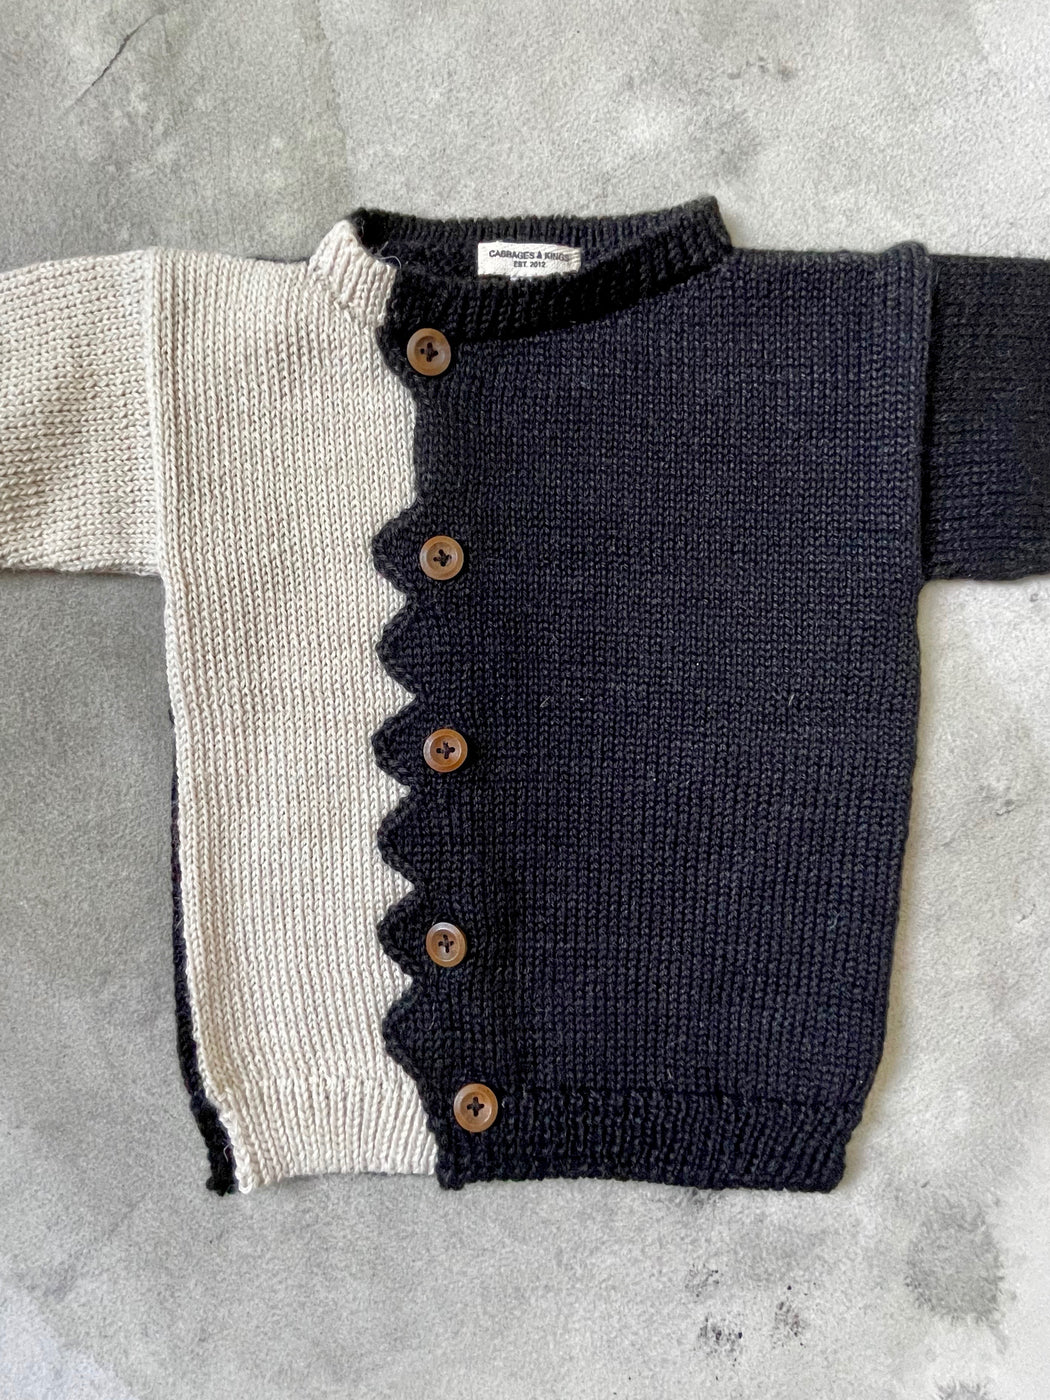 Cabbages & Kings "Zig Zag" Cardigan (6 months - 2 years)